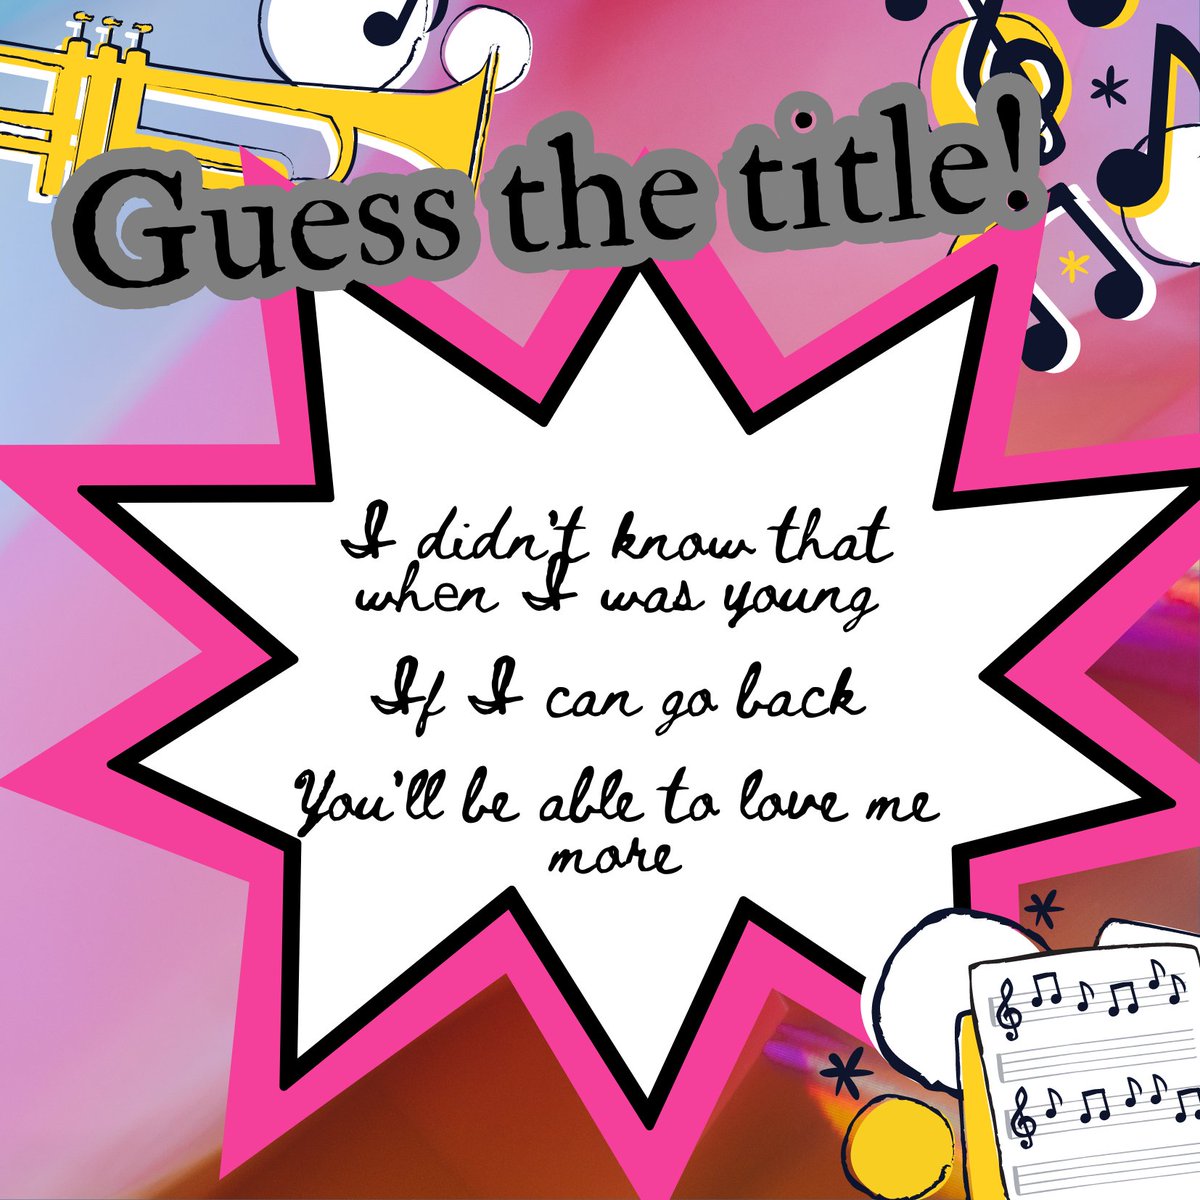 [DubGuess] Guess the title! 🎶 From what song written by Dahyun these lyrics were from? *These are English translation. Don't forget the hashtags #Happy_Dahyun_Month #DAHYUN @JYPETWICE